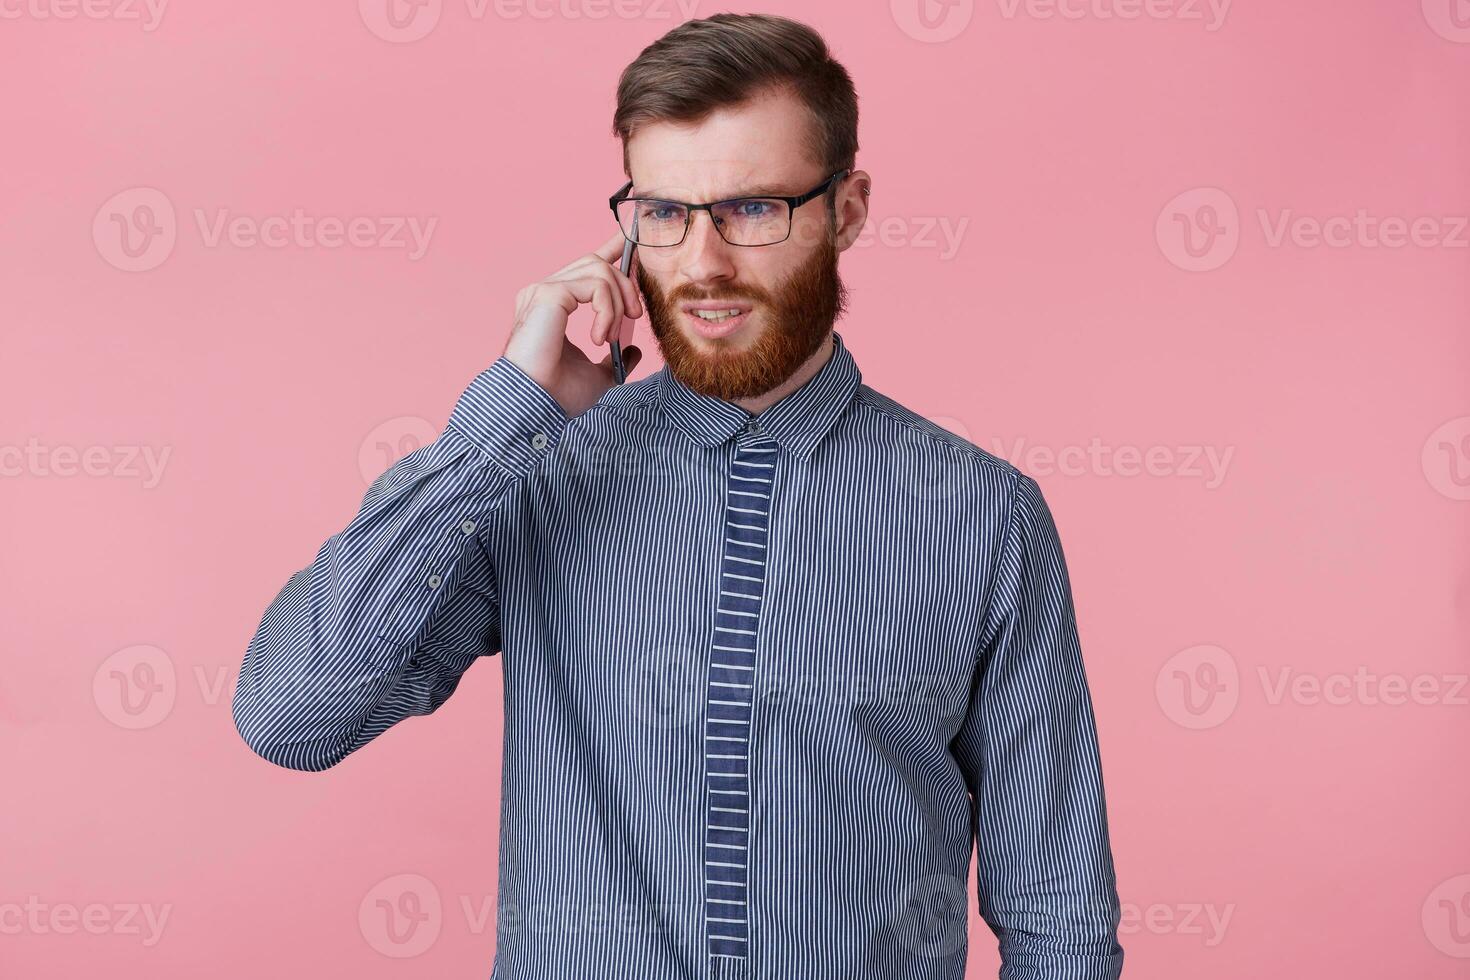 Studio photo of a perplexed young bearded man with glasses dressed in a striped shirt, who is told something unpleasant by phone. Isolated over pink background.